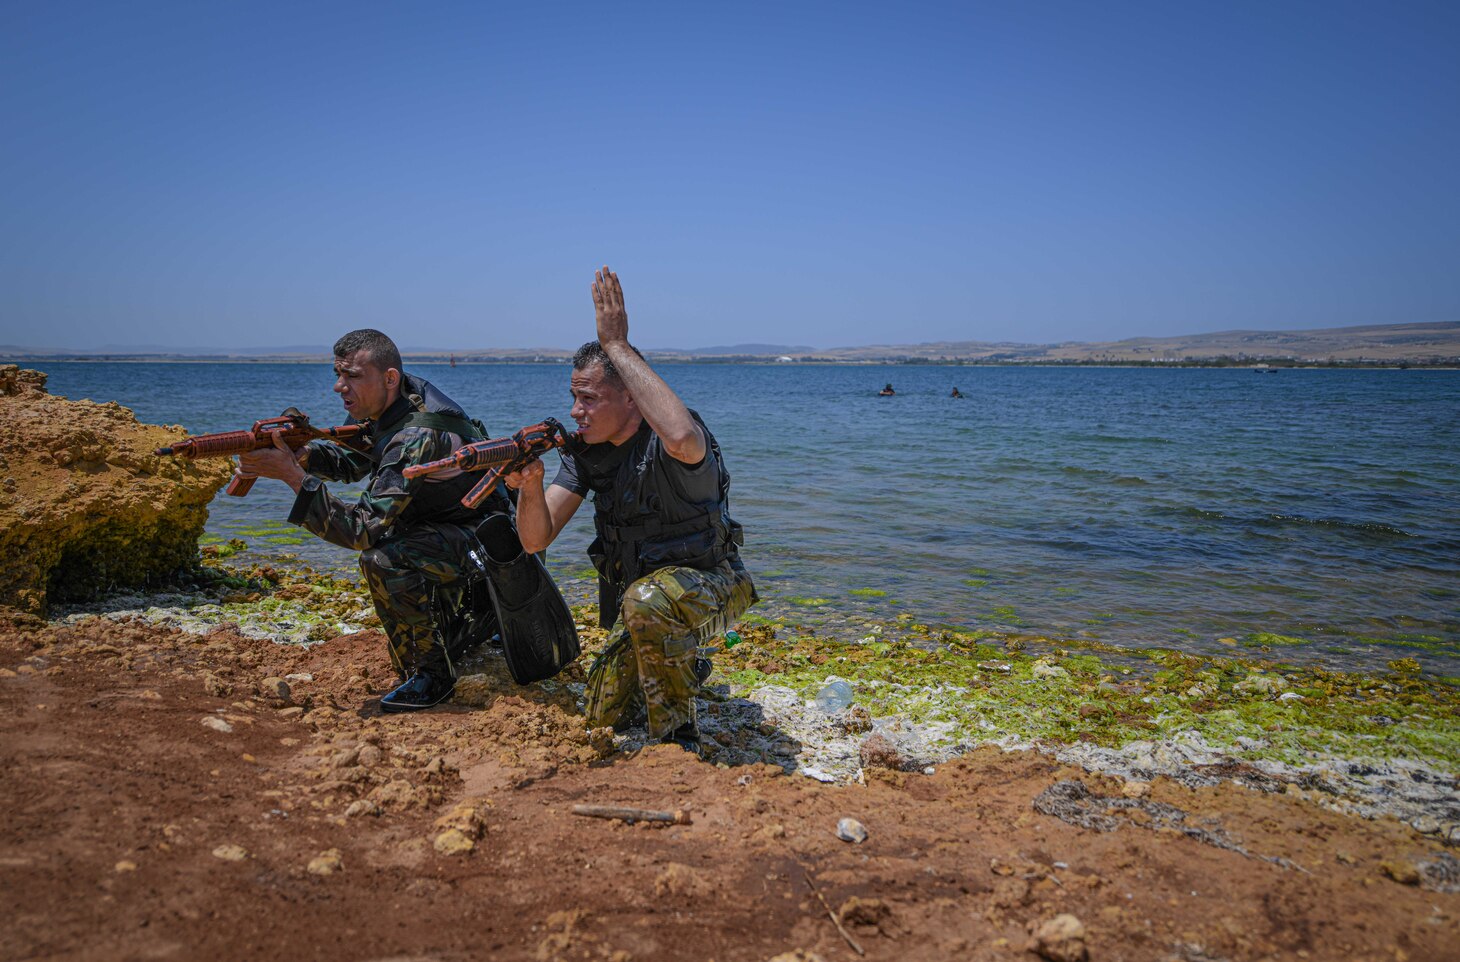 U.S. Marines, assigned to Task Force 61 Naval Amphibious Forces Europe/ 2d Marine Division (TF-61/2), and members of the Tunisian 51st Regiment Commando Maritime practice scout-swimmer techniques and clandestine landing and withdrawal during exercise Phoenix Express 2022 in Bizerte, Tunisia, May 24, 2022.